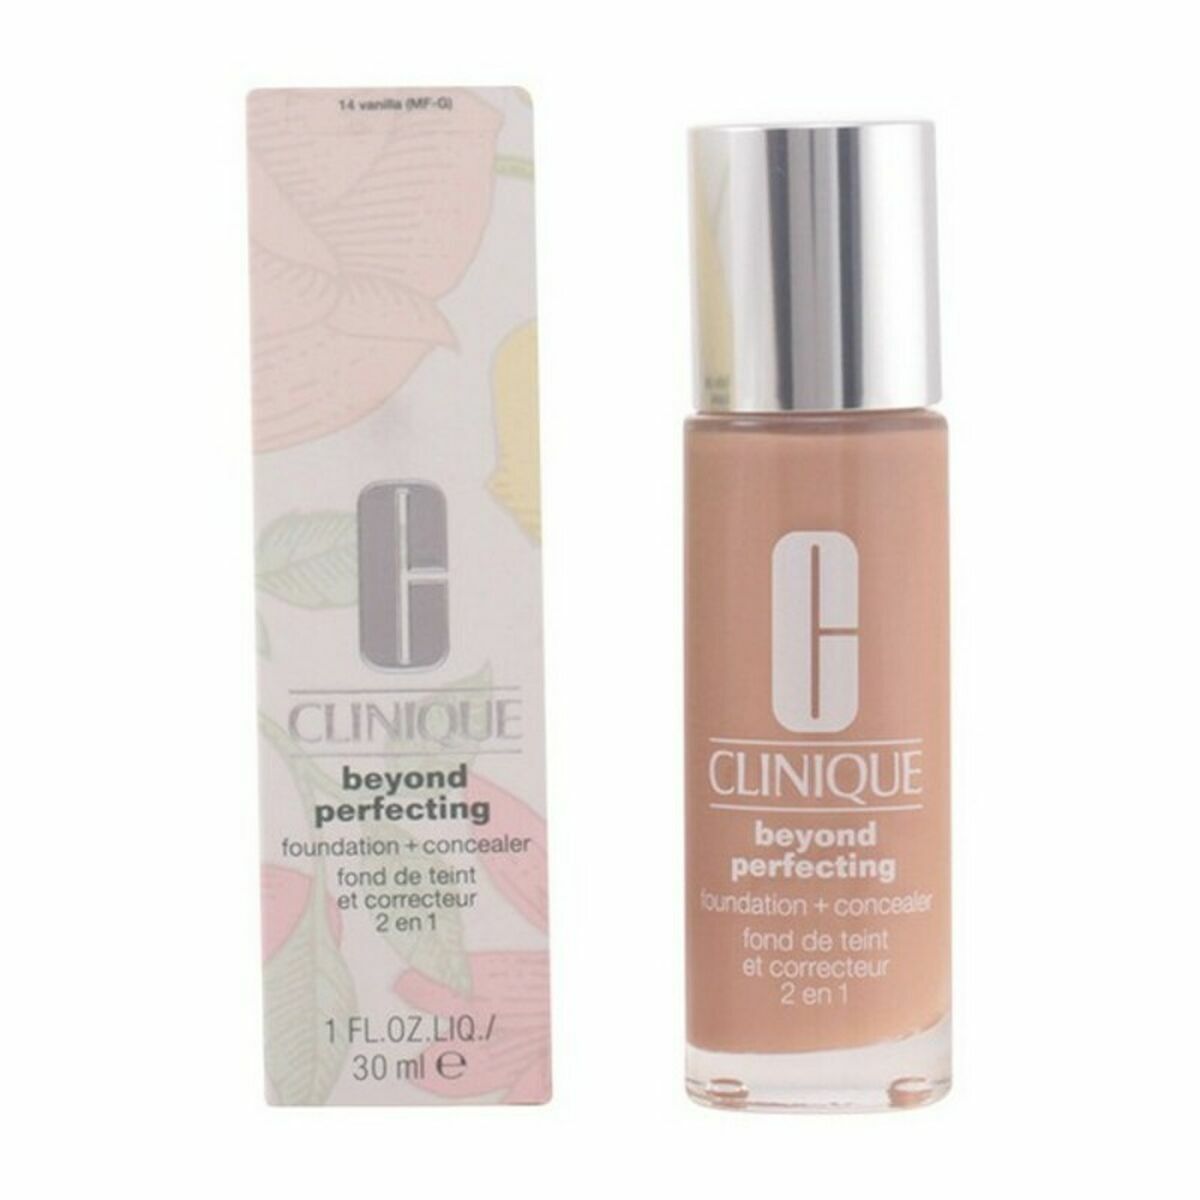 Foundation Beyond Perfecting Clinique 14-vainilla (30 ml)